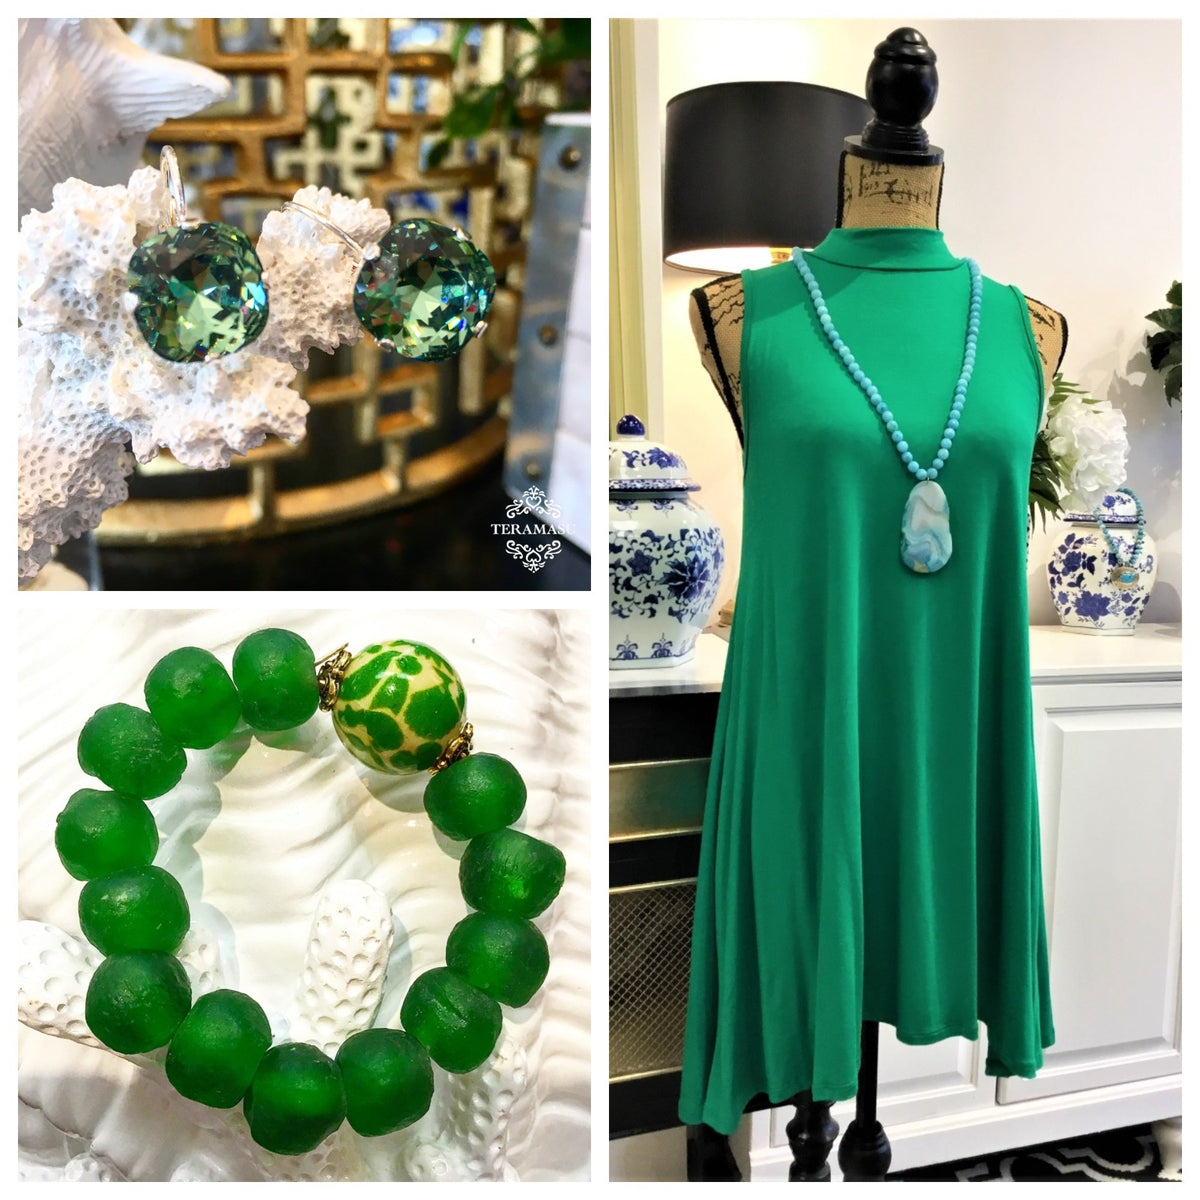 Monday Must-Haves: Gorgeously Green, Summer-To-Fall Style Inspiration from Teramasu